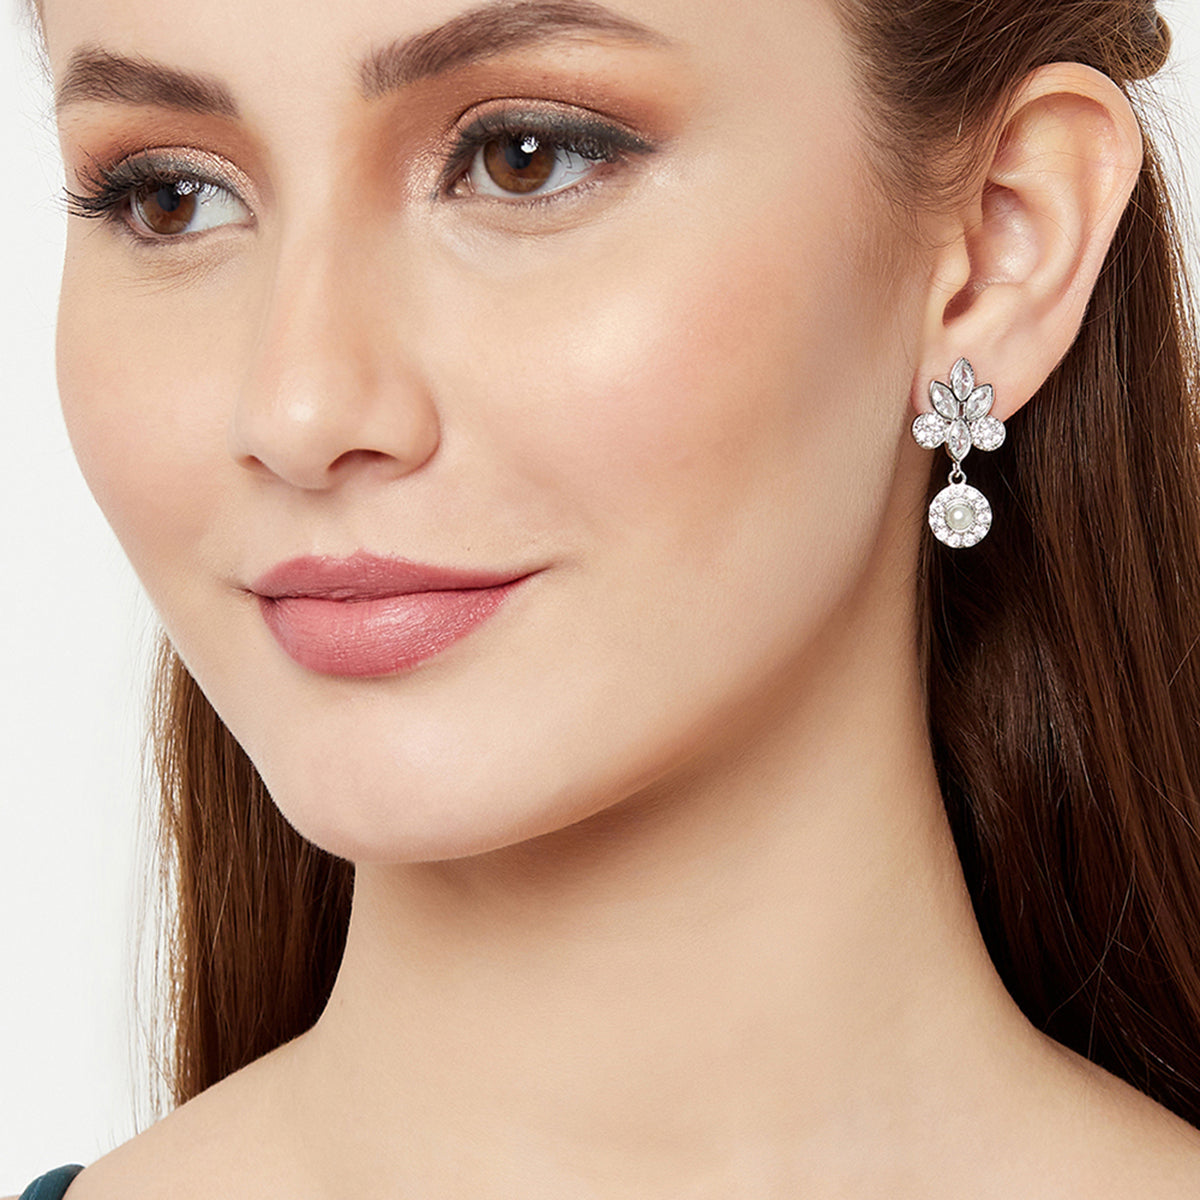 Designer Earrings From Pearly Whites Collection